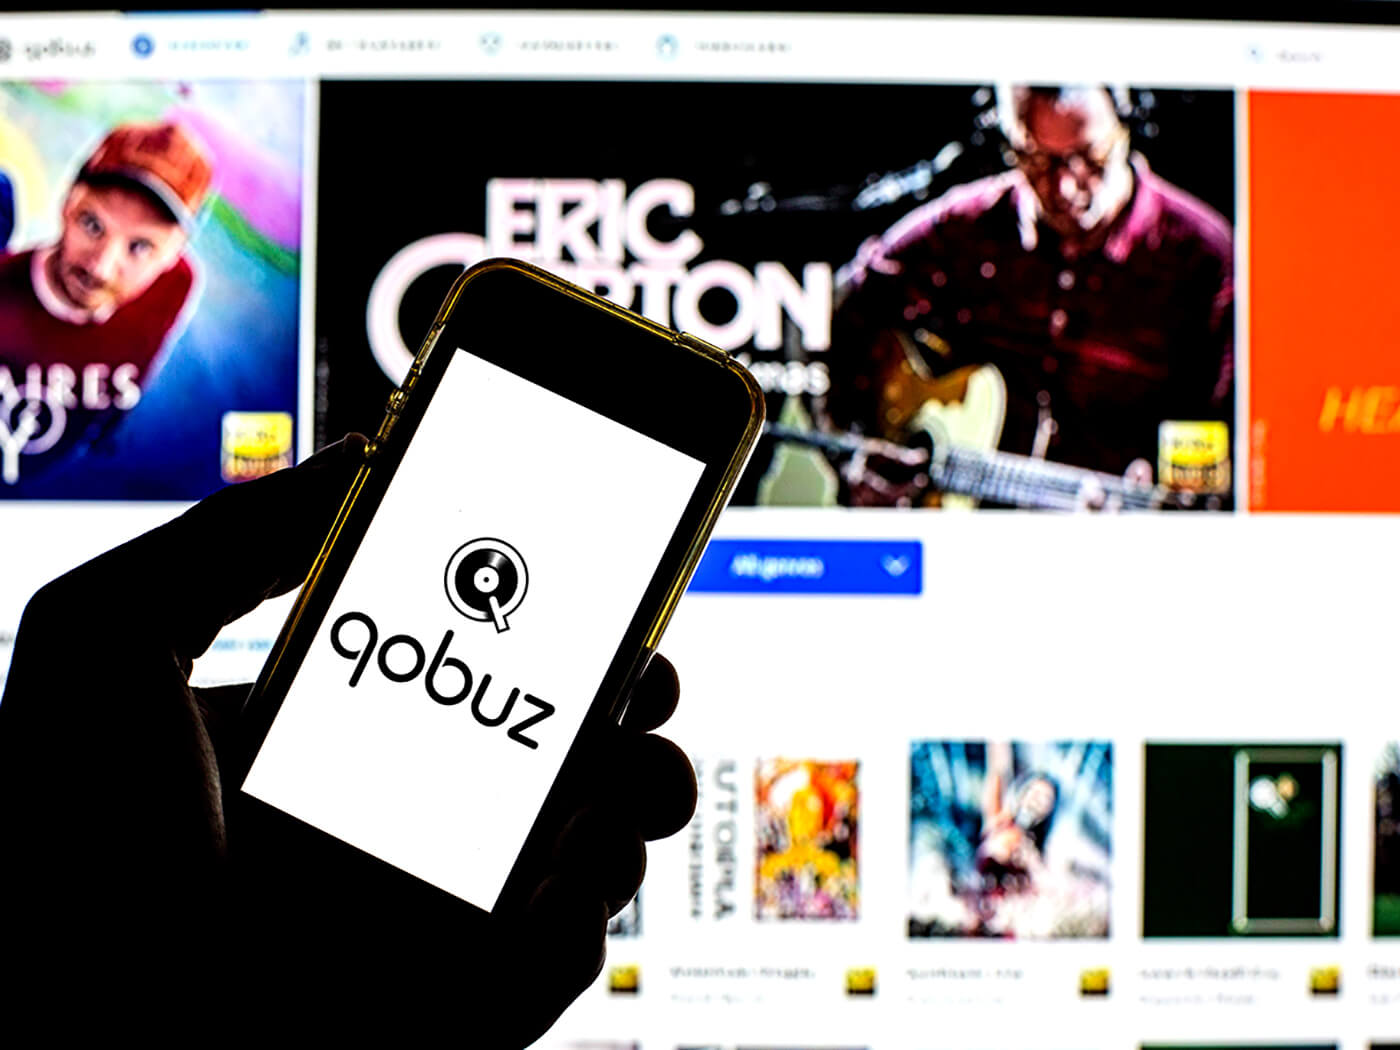 Qobuz logo on a phone with the website in the background, photo by Thiago Prudêncio/SOPA Images/LightRocket via Getty Images